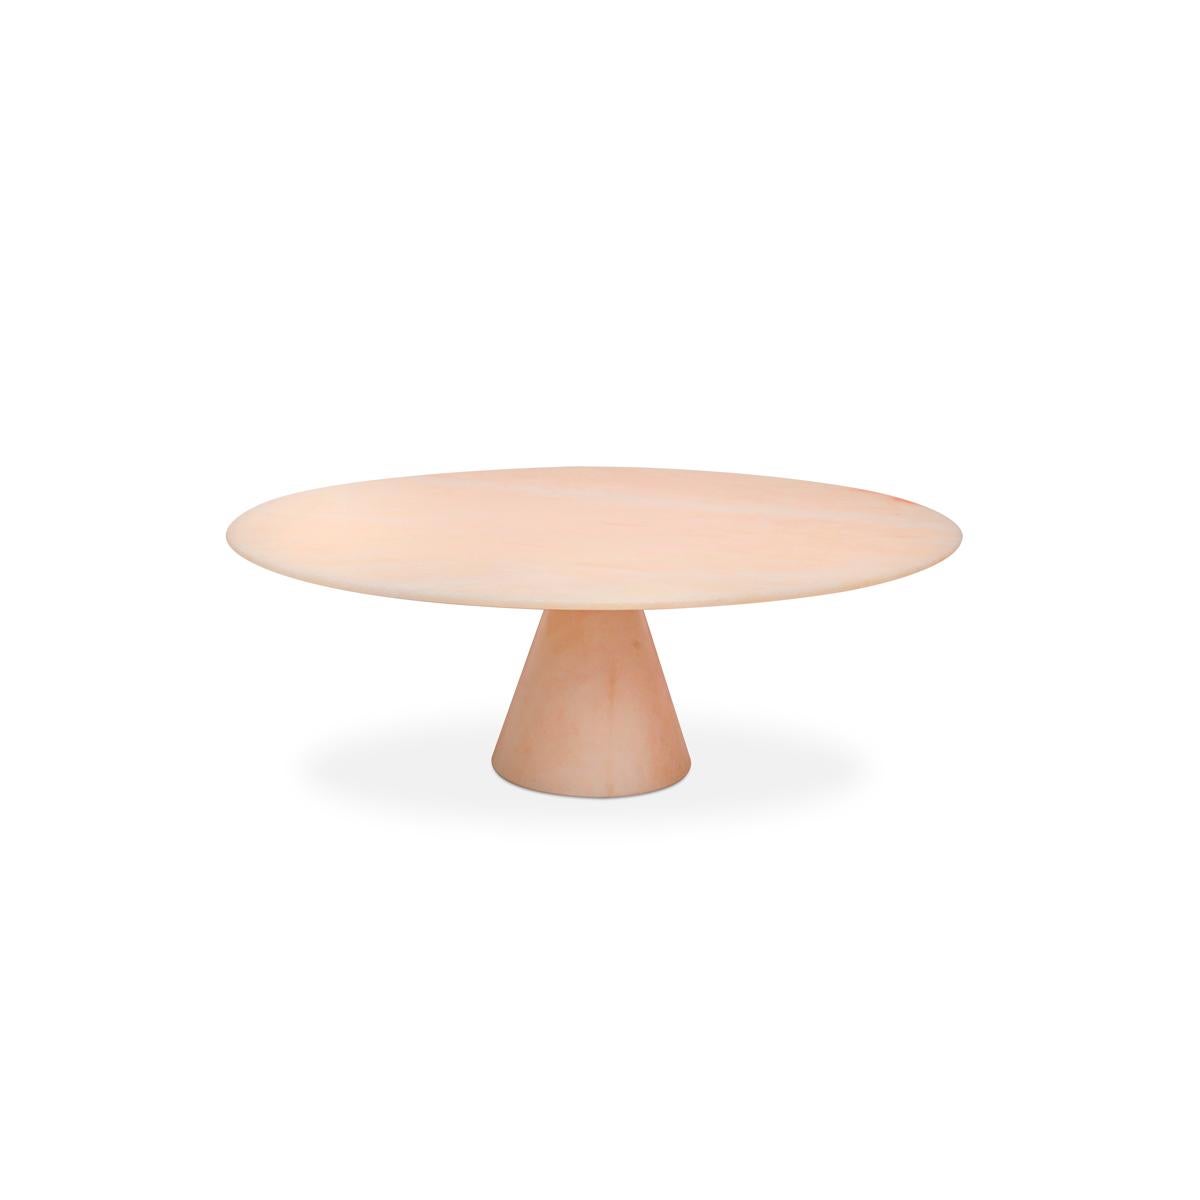 Selene is a stand in Rosa Portogallo, a preciuous pale pink kind of marble. This piece is part of the Lunar Landscape designed by Elisa Ossino, who conceived for Paola C. a tableware collection, revisiting the Classic themes of mise en place and the